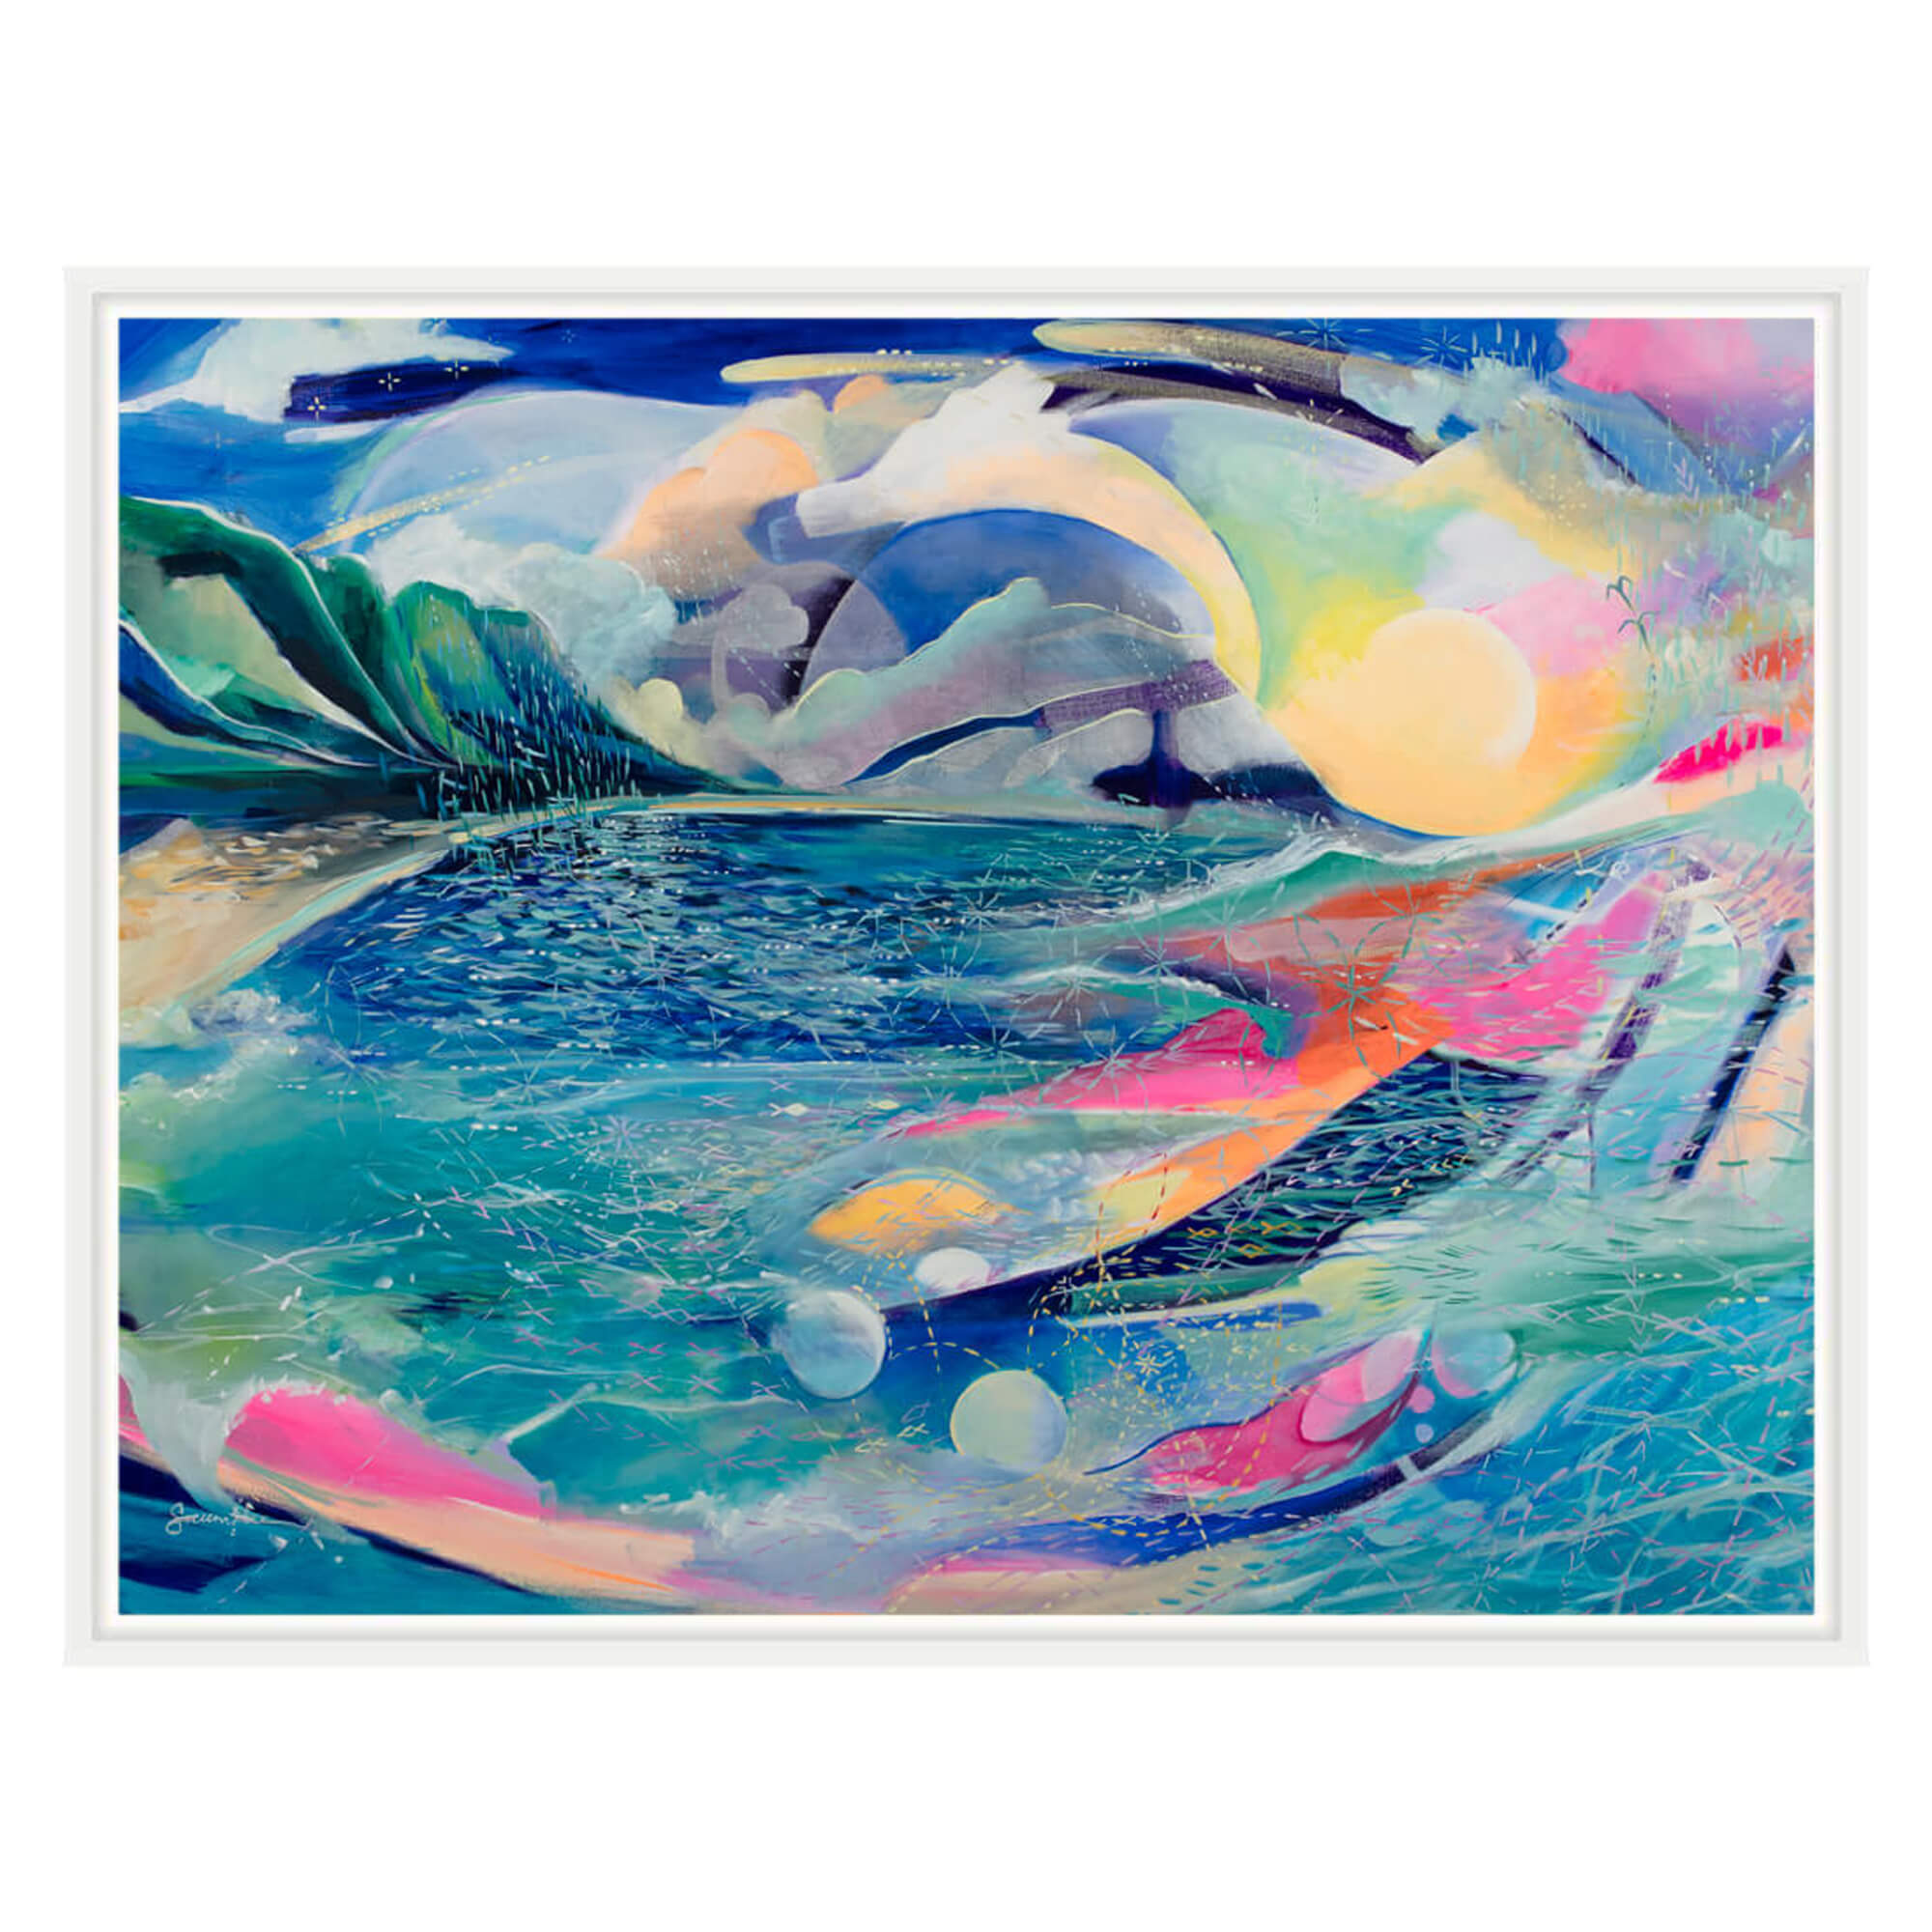 Framed canvas art print of an abstract artwork of a seascape with vibrant pastel colors Hawaii artist Saumolia Puapuaga 